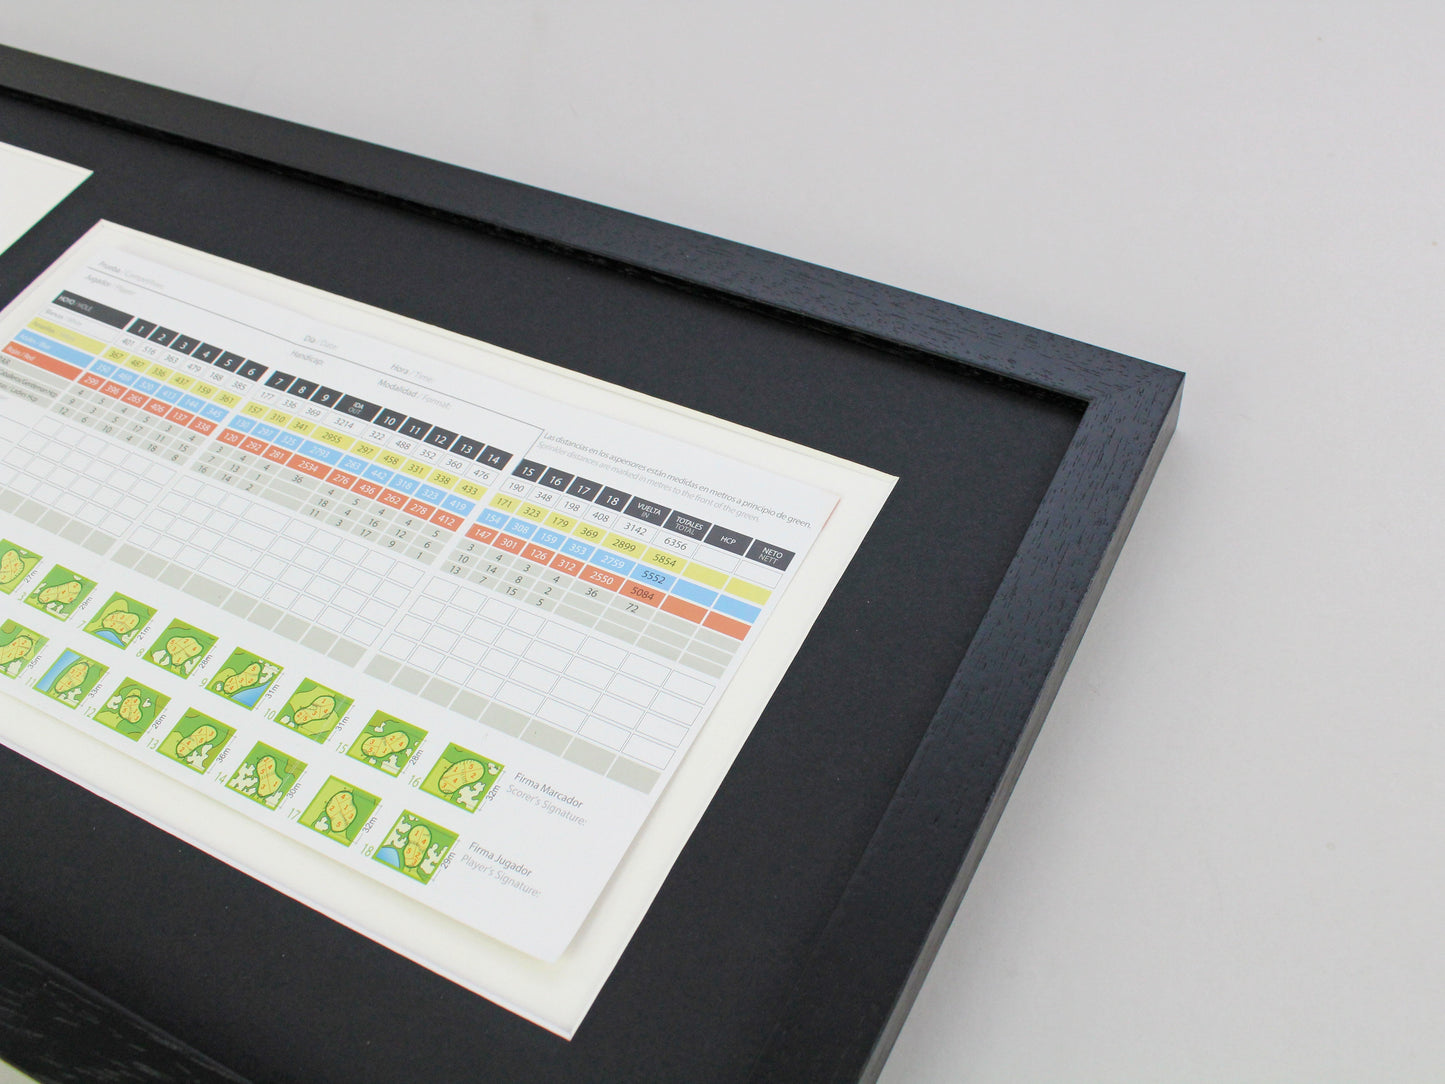 Personalised Golf Score Card Display Frame | Score Card sizes can vary - Check your size before purchase.